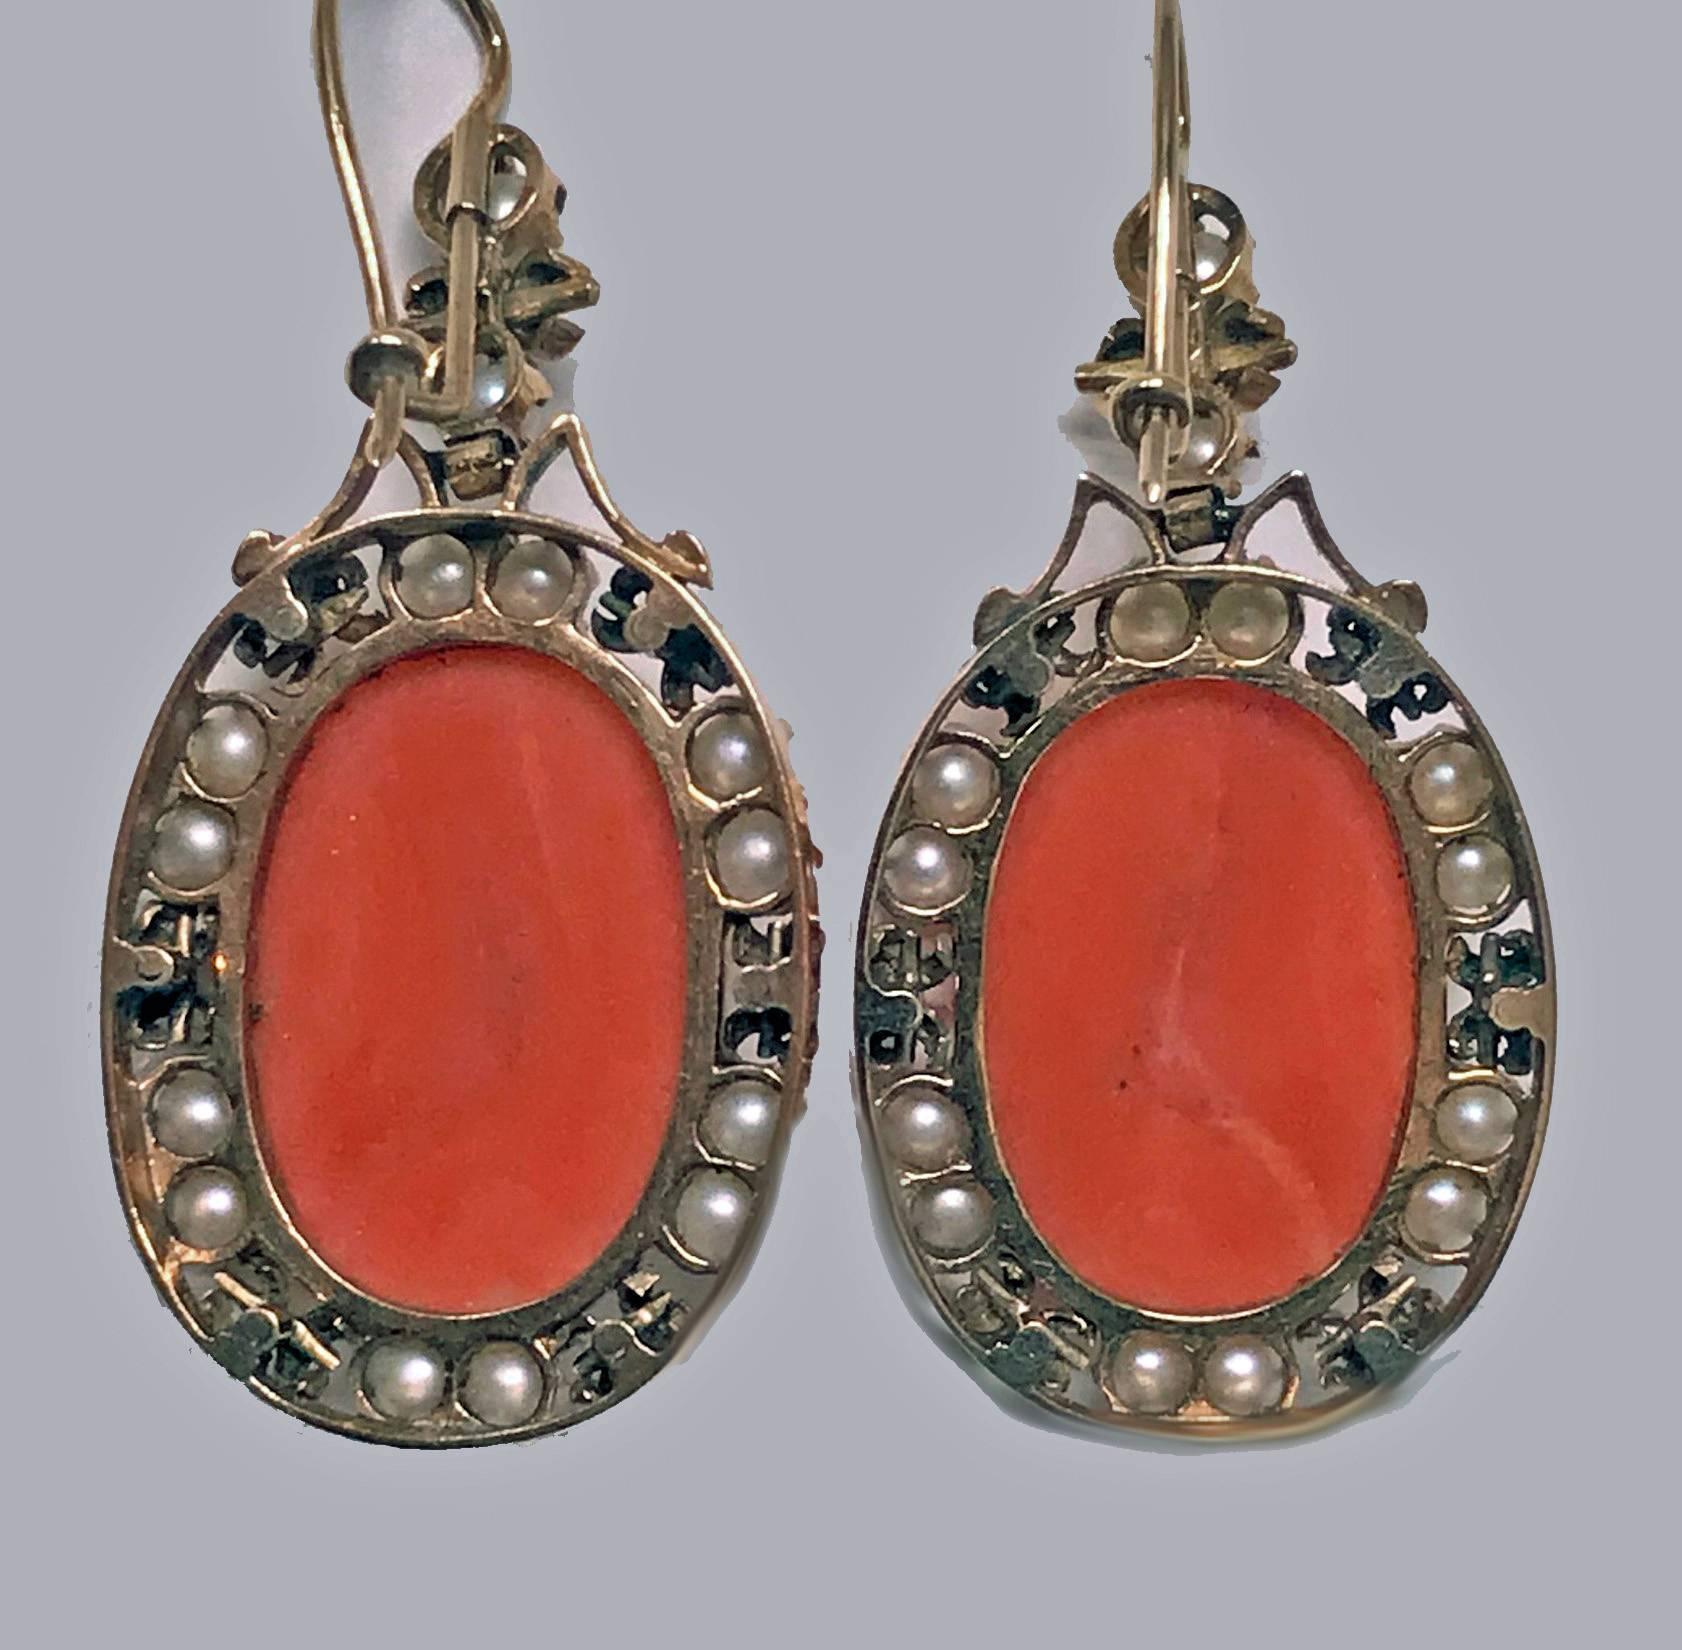 Rare Fine Carved  Coral Corallium Rubrum Pendant Brooch and Earrings, C. 1880 1